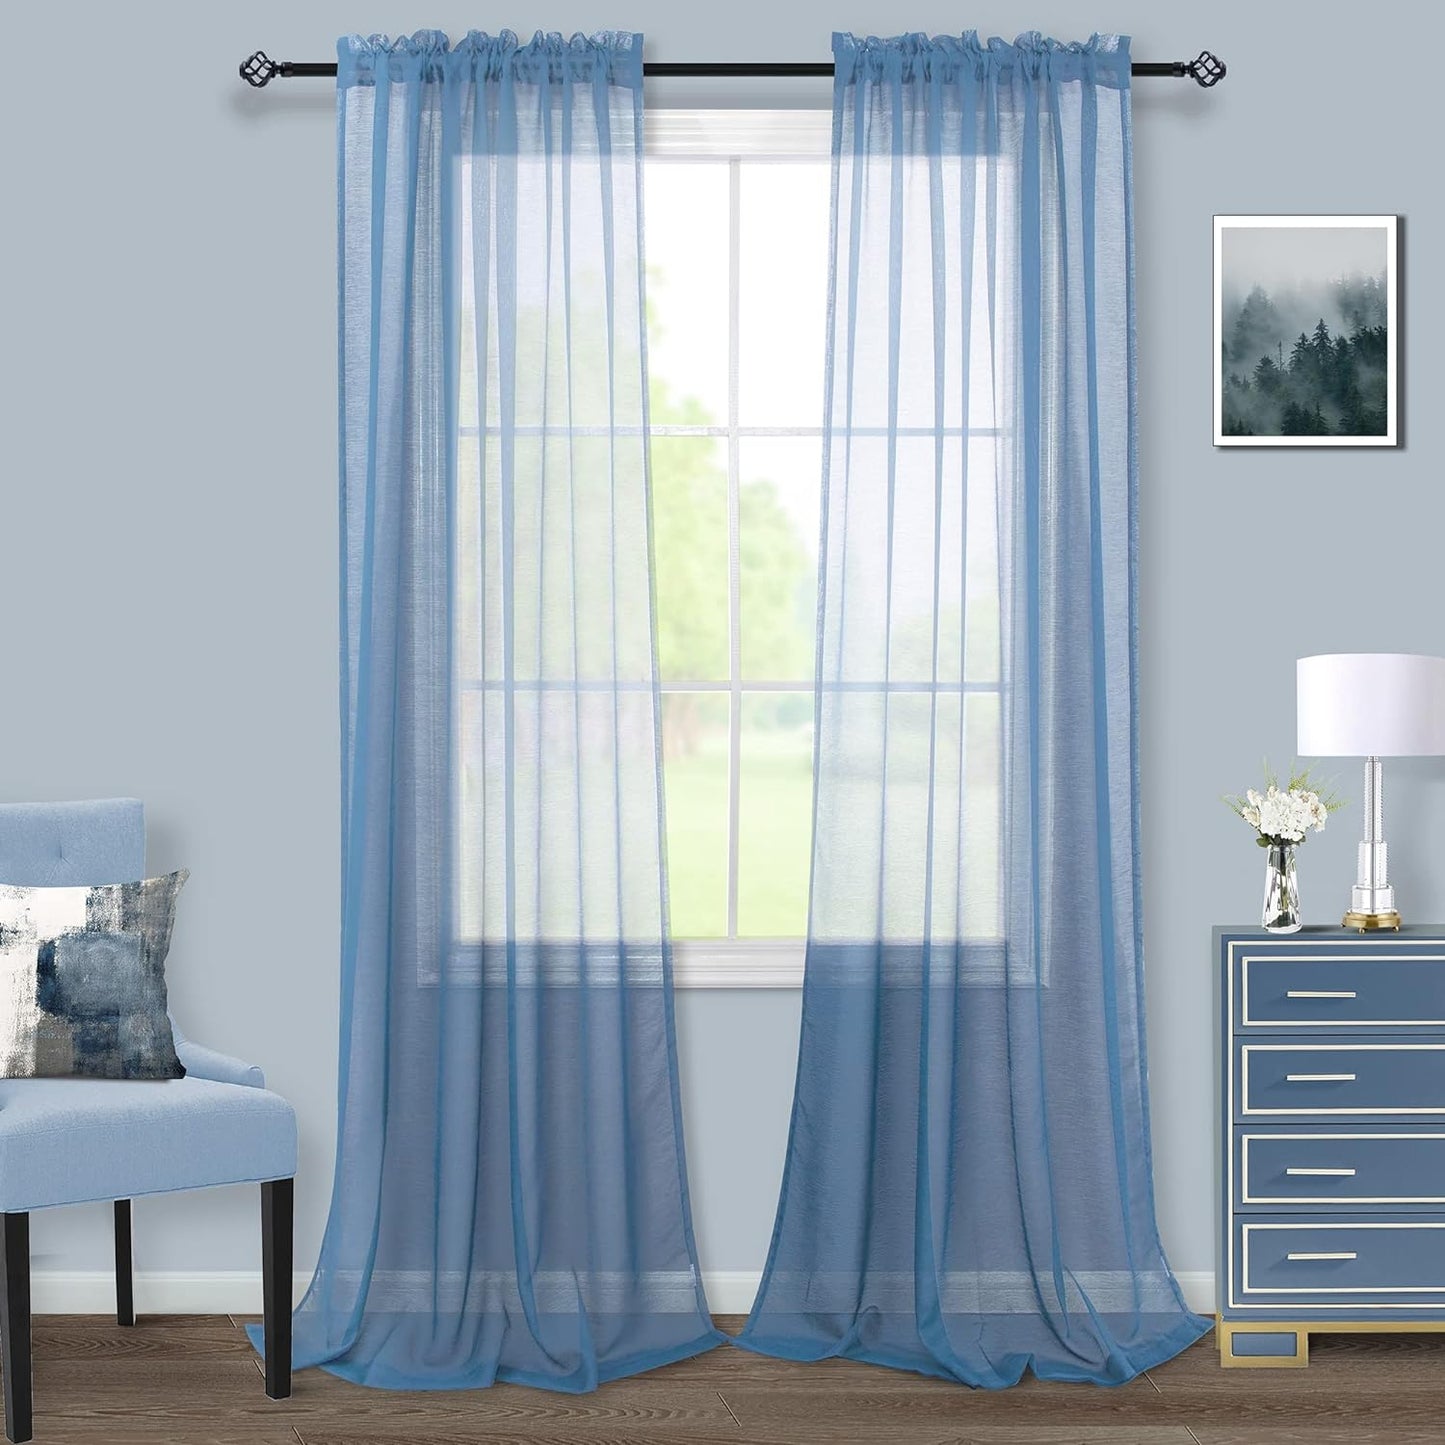 Terracotta Curtains 84 Inch Length for Living Room 2 Panel Sets Rod Pocket Sheer Curtains for Living Room Rust Burnt Orange Red  PITALK TEXTILE Dusty Blue 52X120 